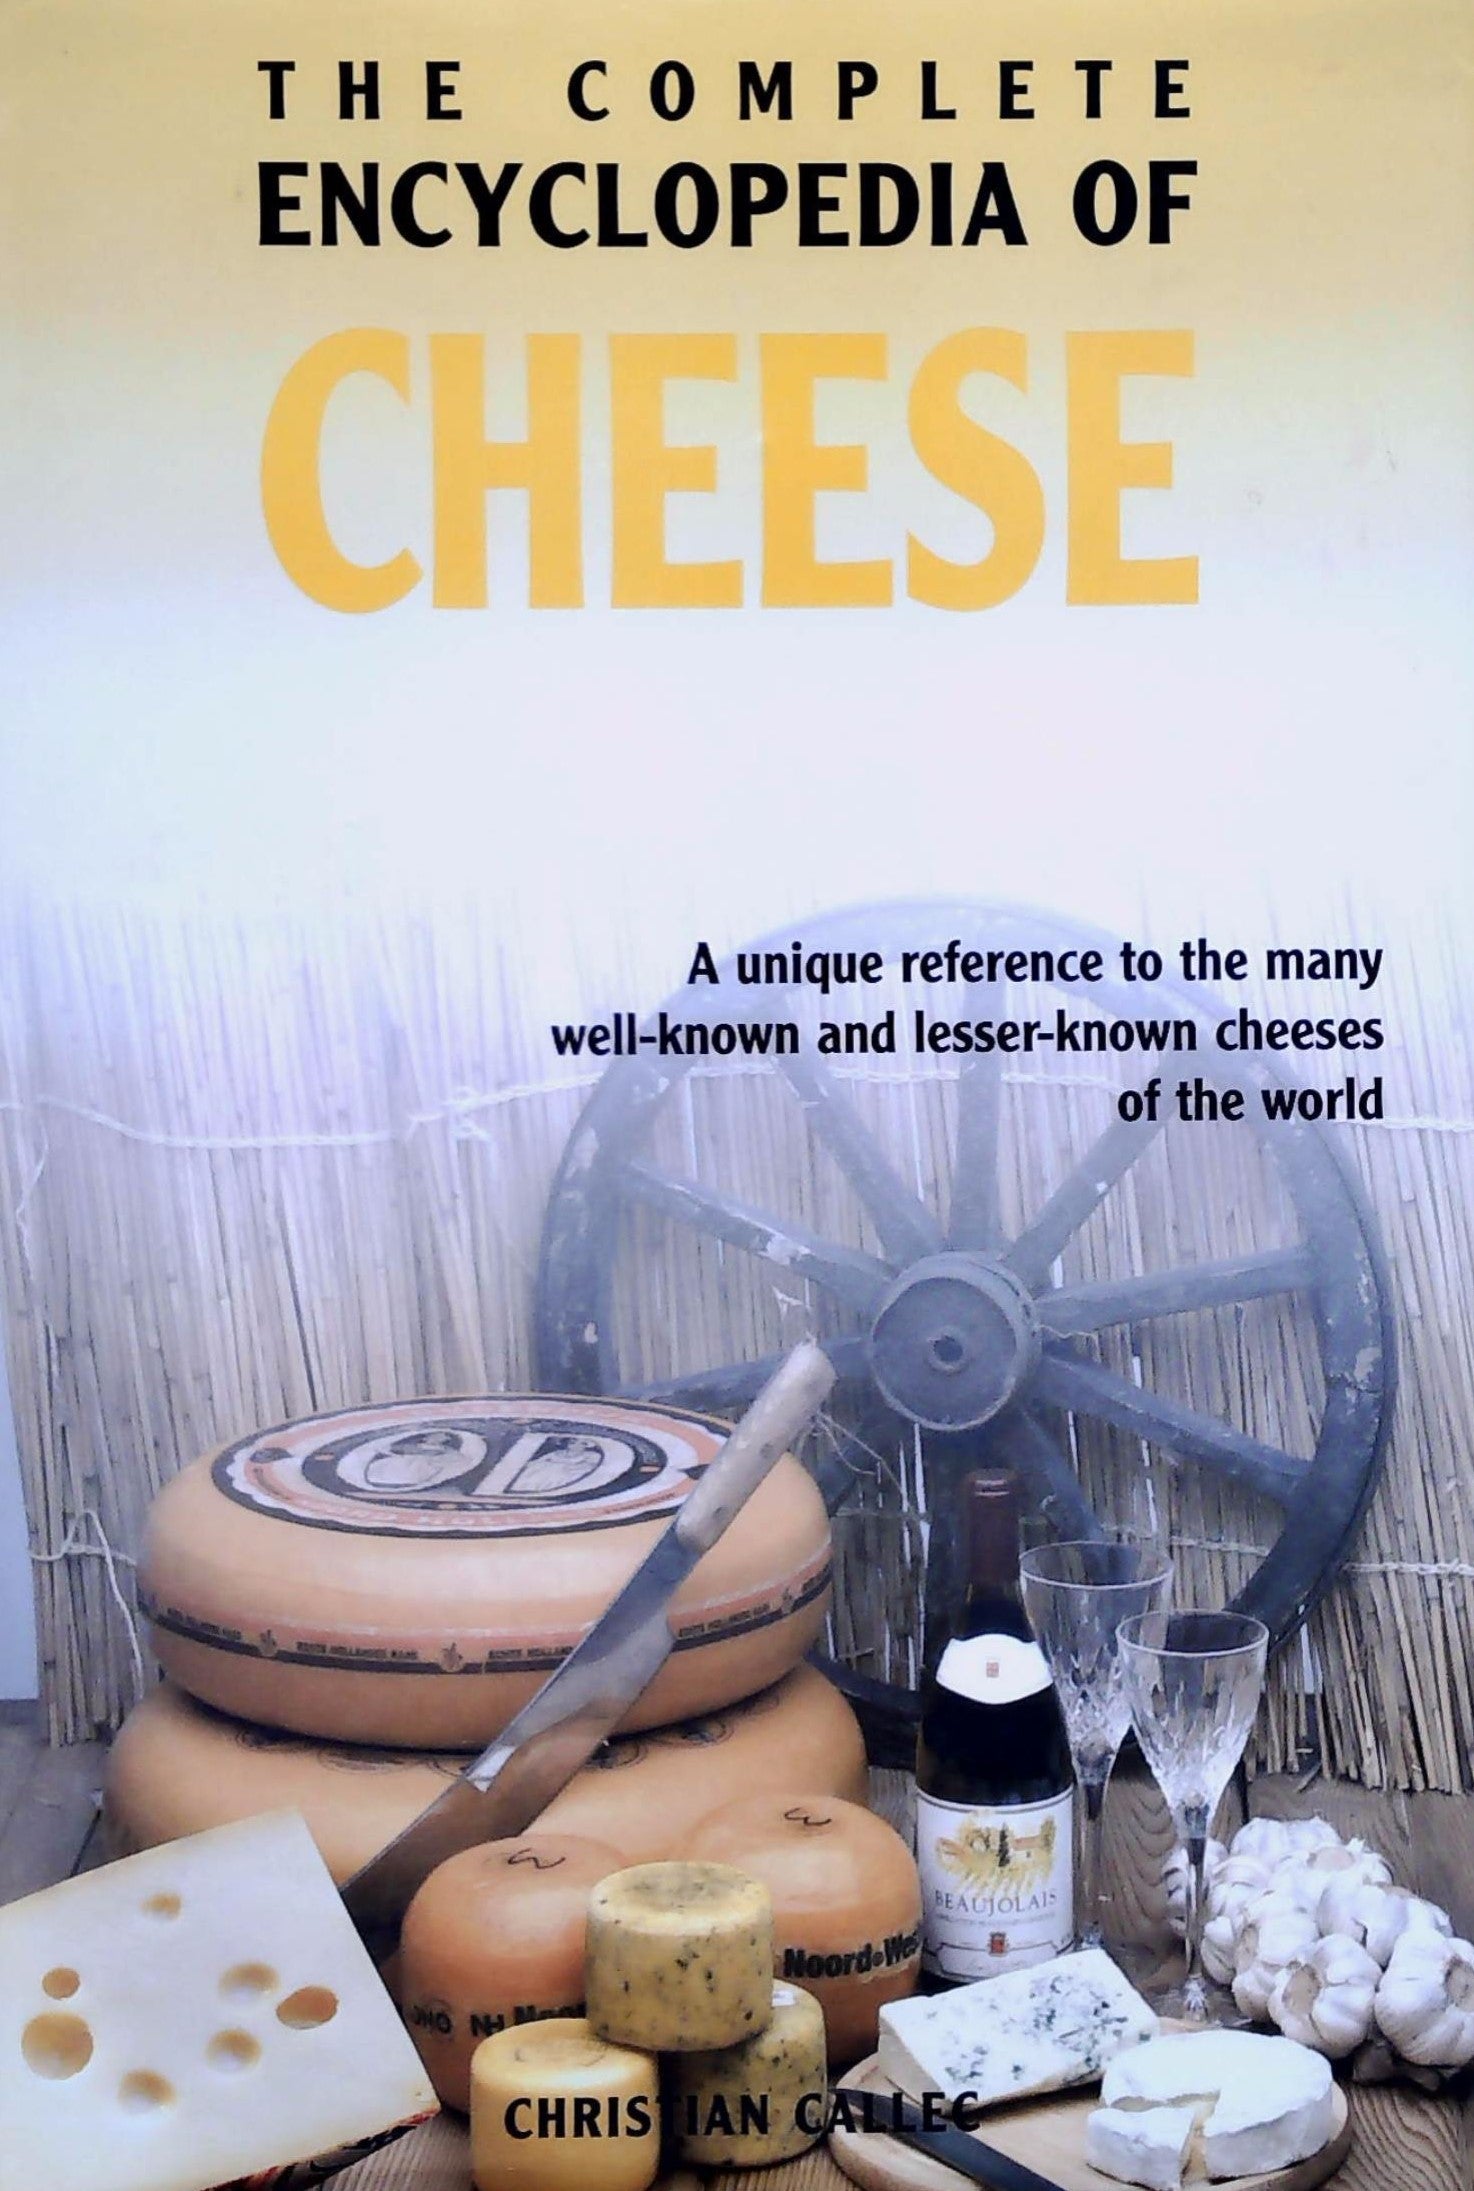 Livre ISBN 1840531681 The complete encyclopedia of cheese (Christian Callec)